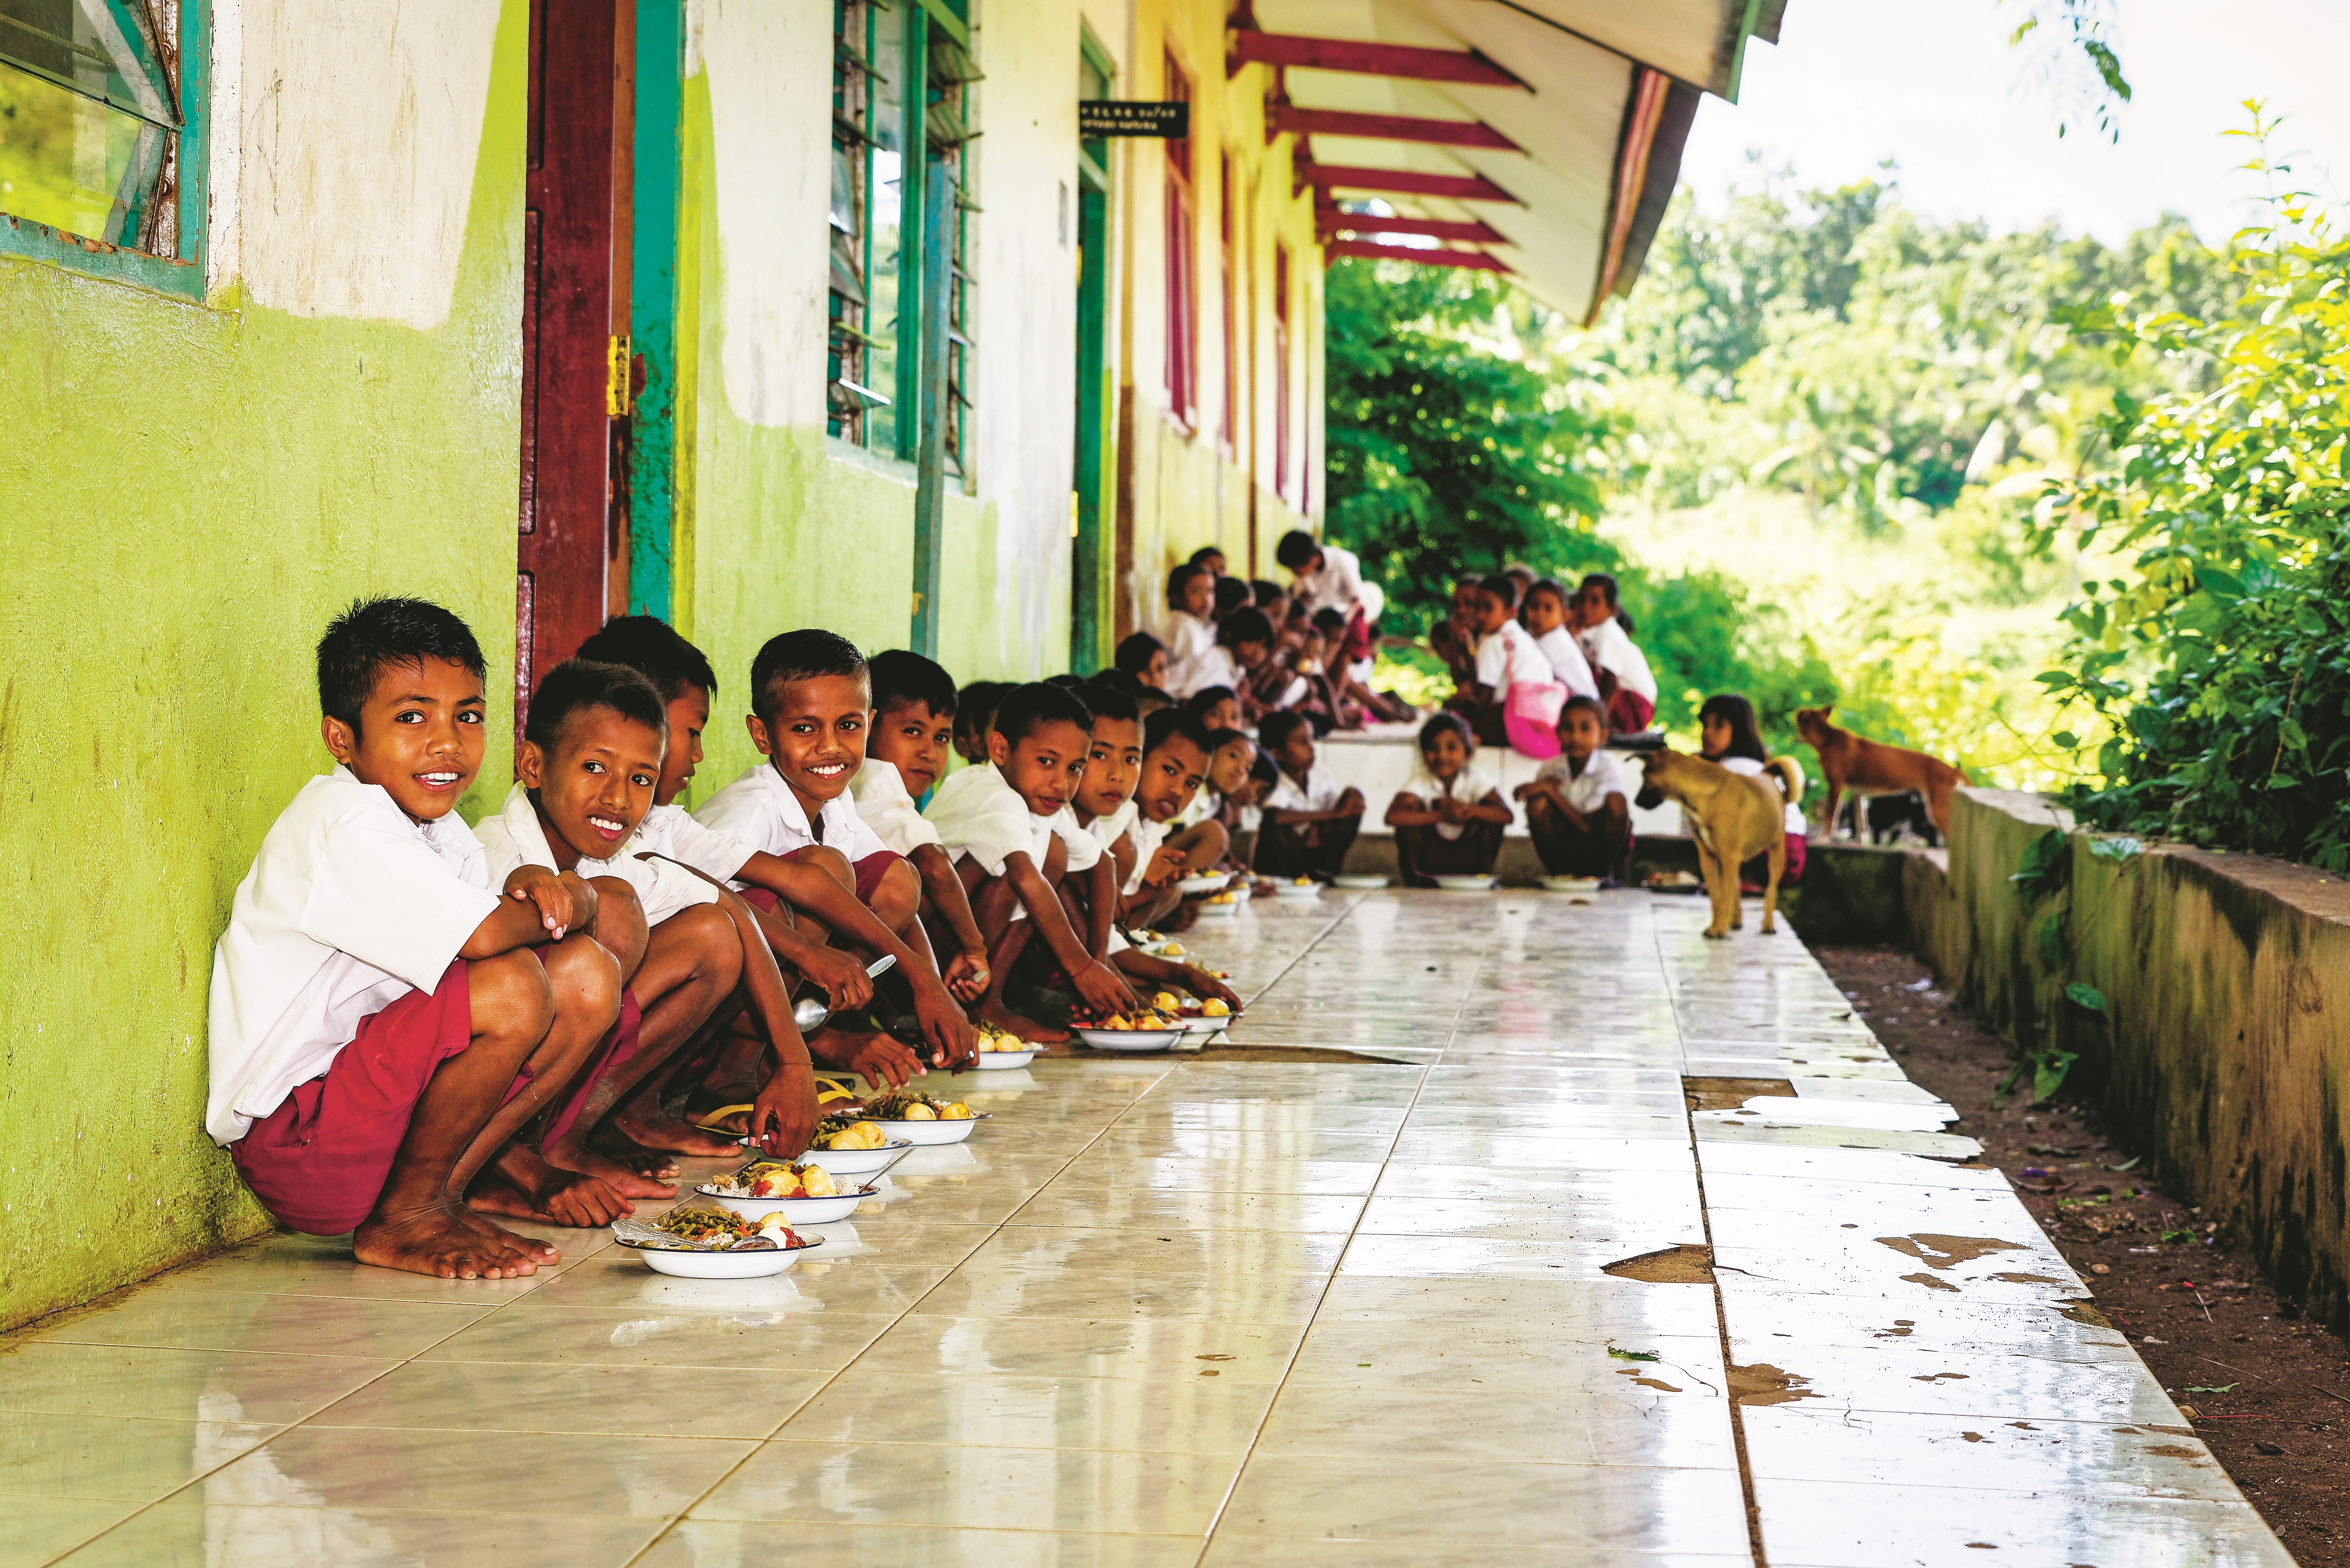 The Nihi beach resort on the island of Sumba works with the Sumba Foundation to provide free lunches to three local schools. Photo: Tania Araujo for Nihi